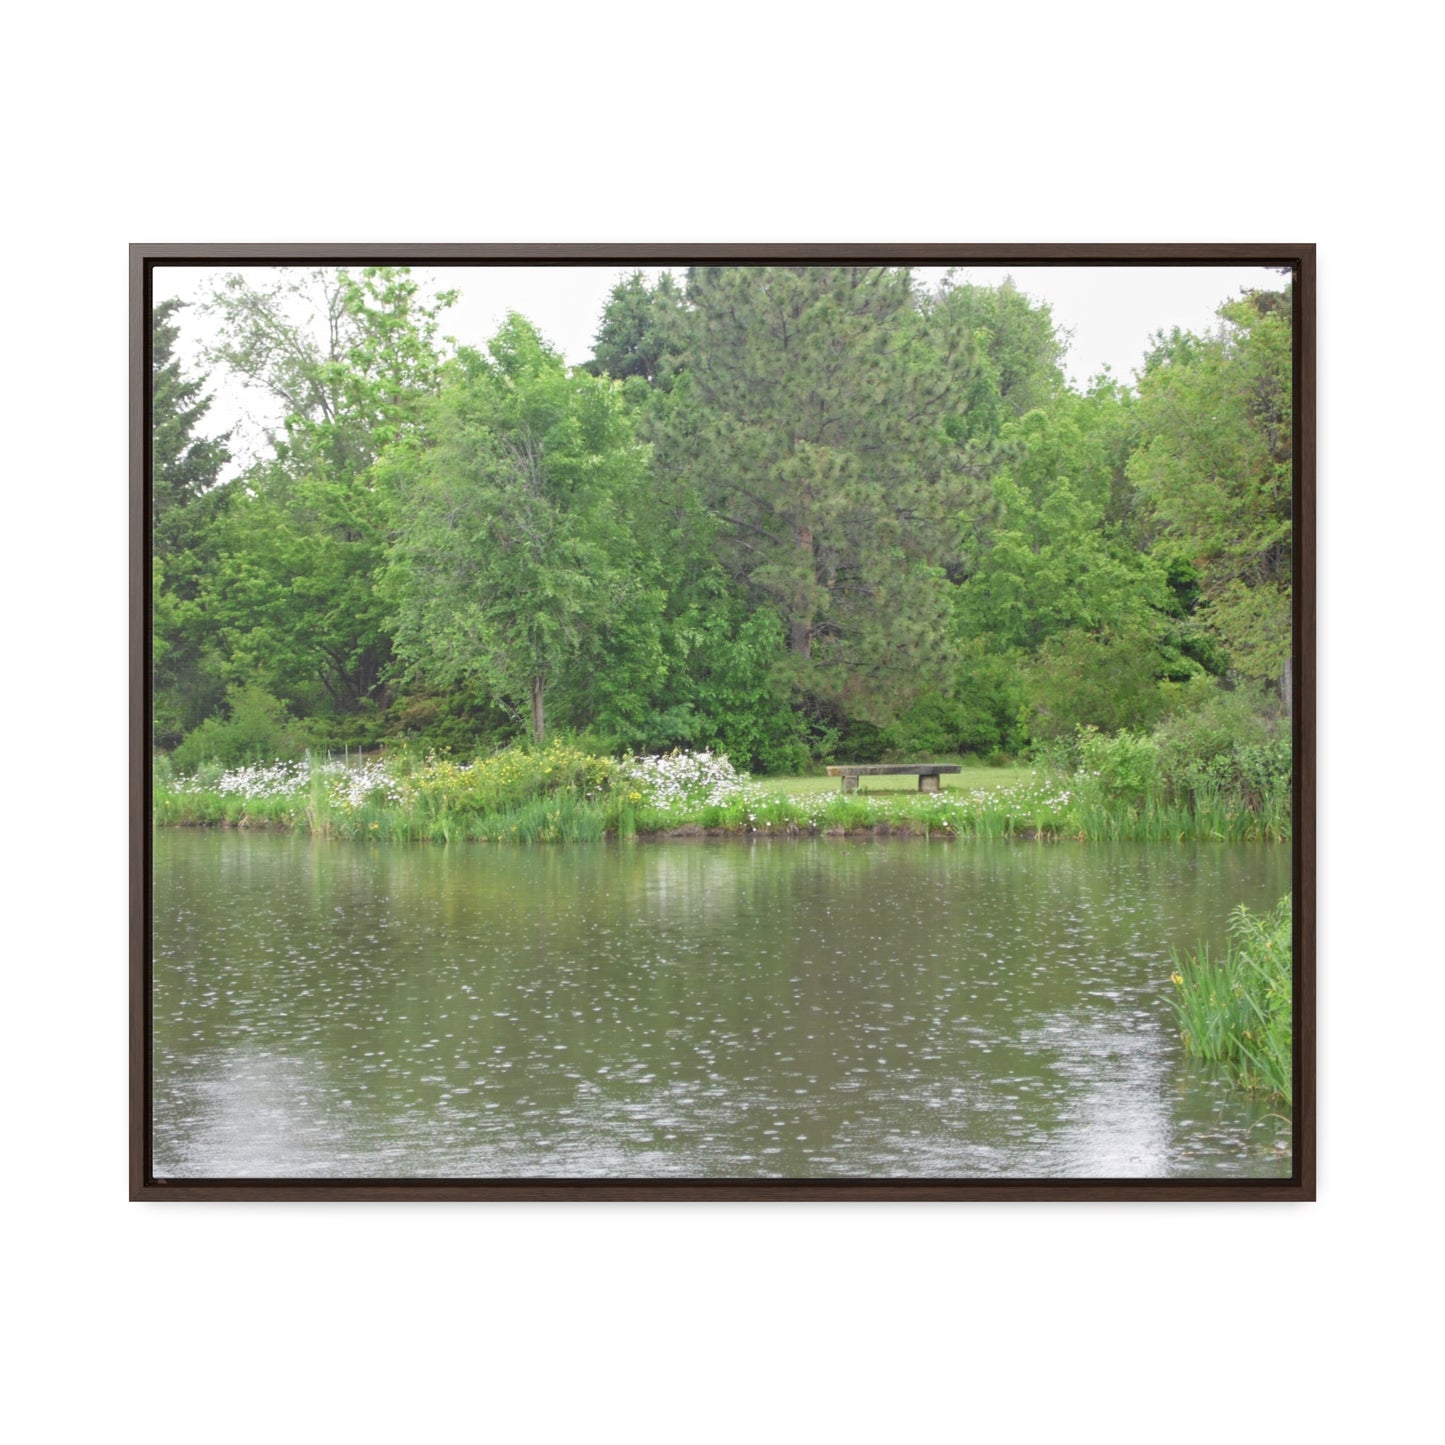 Raindrops On The Water Gallery Canvas Wraps Framed